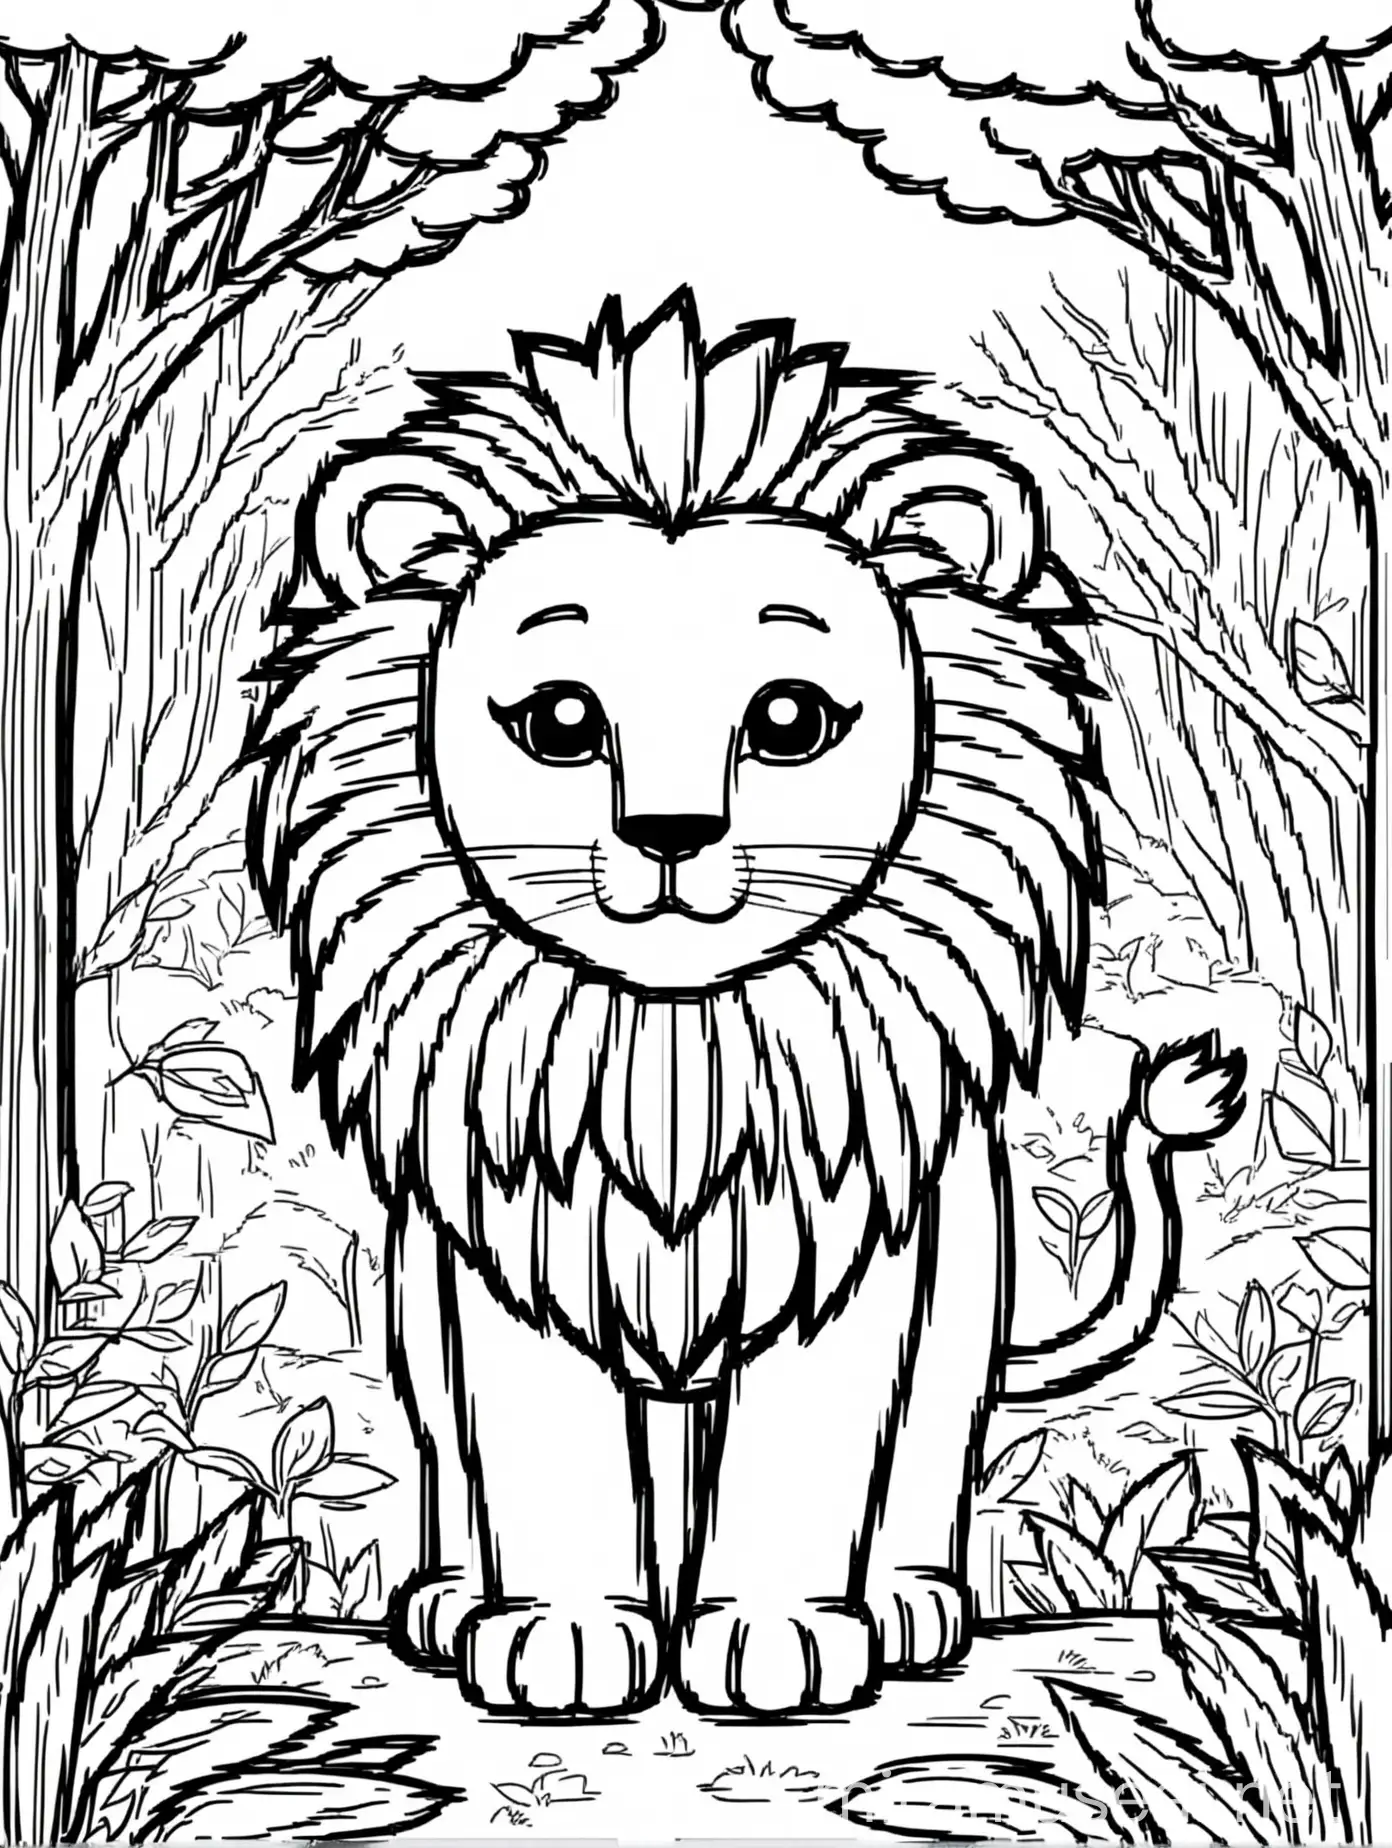 simple black line cute lion in the forest, black and white full page coloring book page for kids, simple, shapes with black lines printable, outlines art, thin lines, no shades, crisp lines -- style 4b--v4-, white background